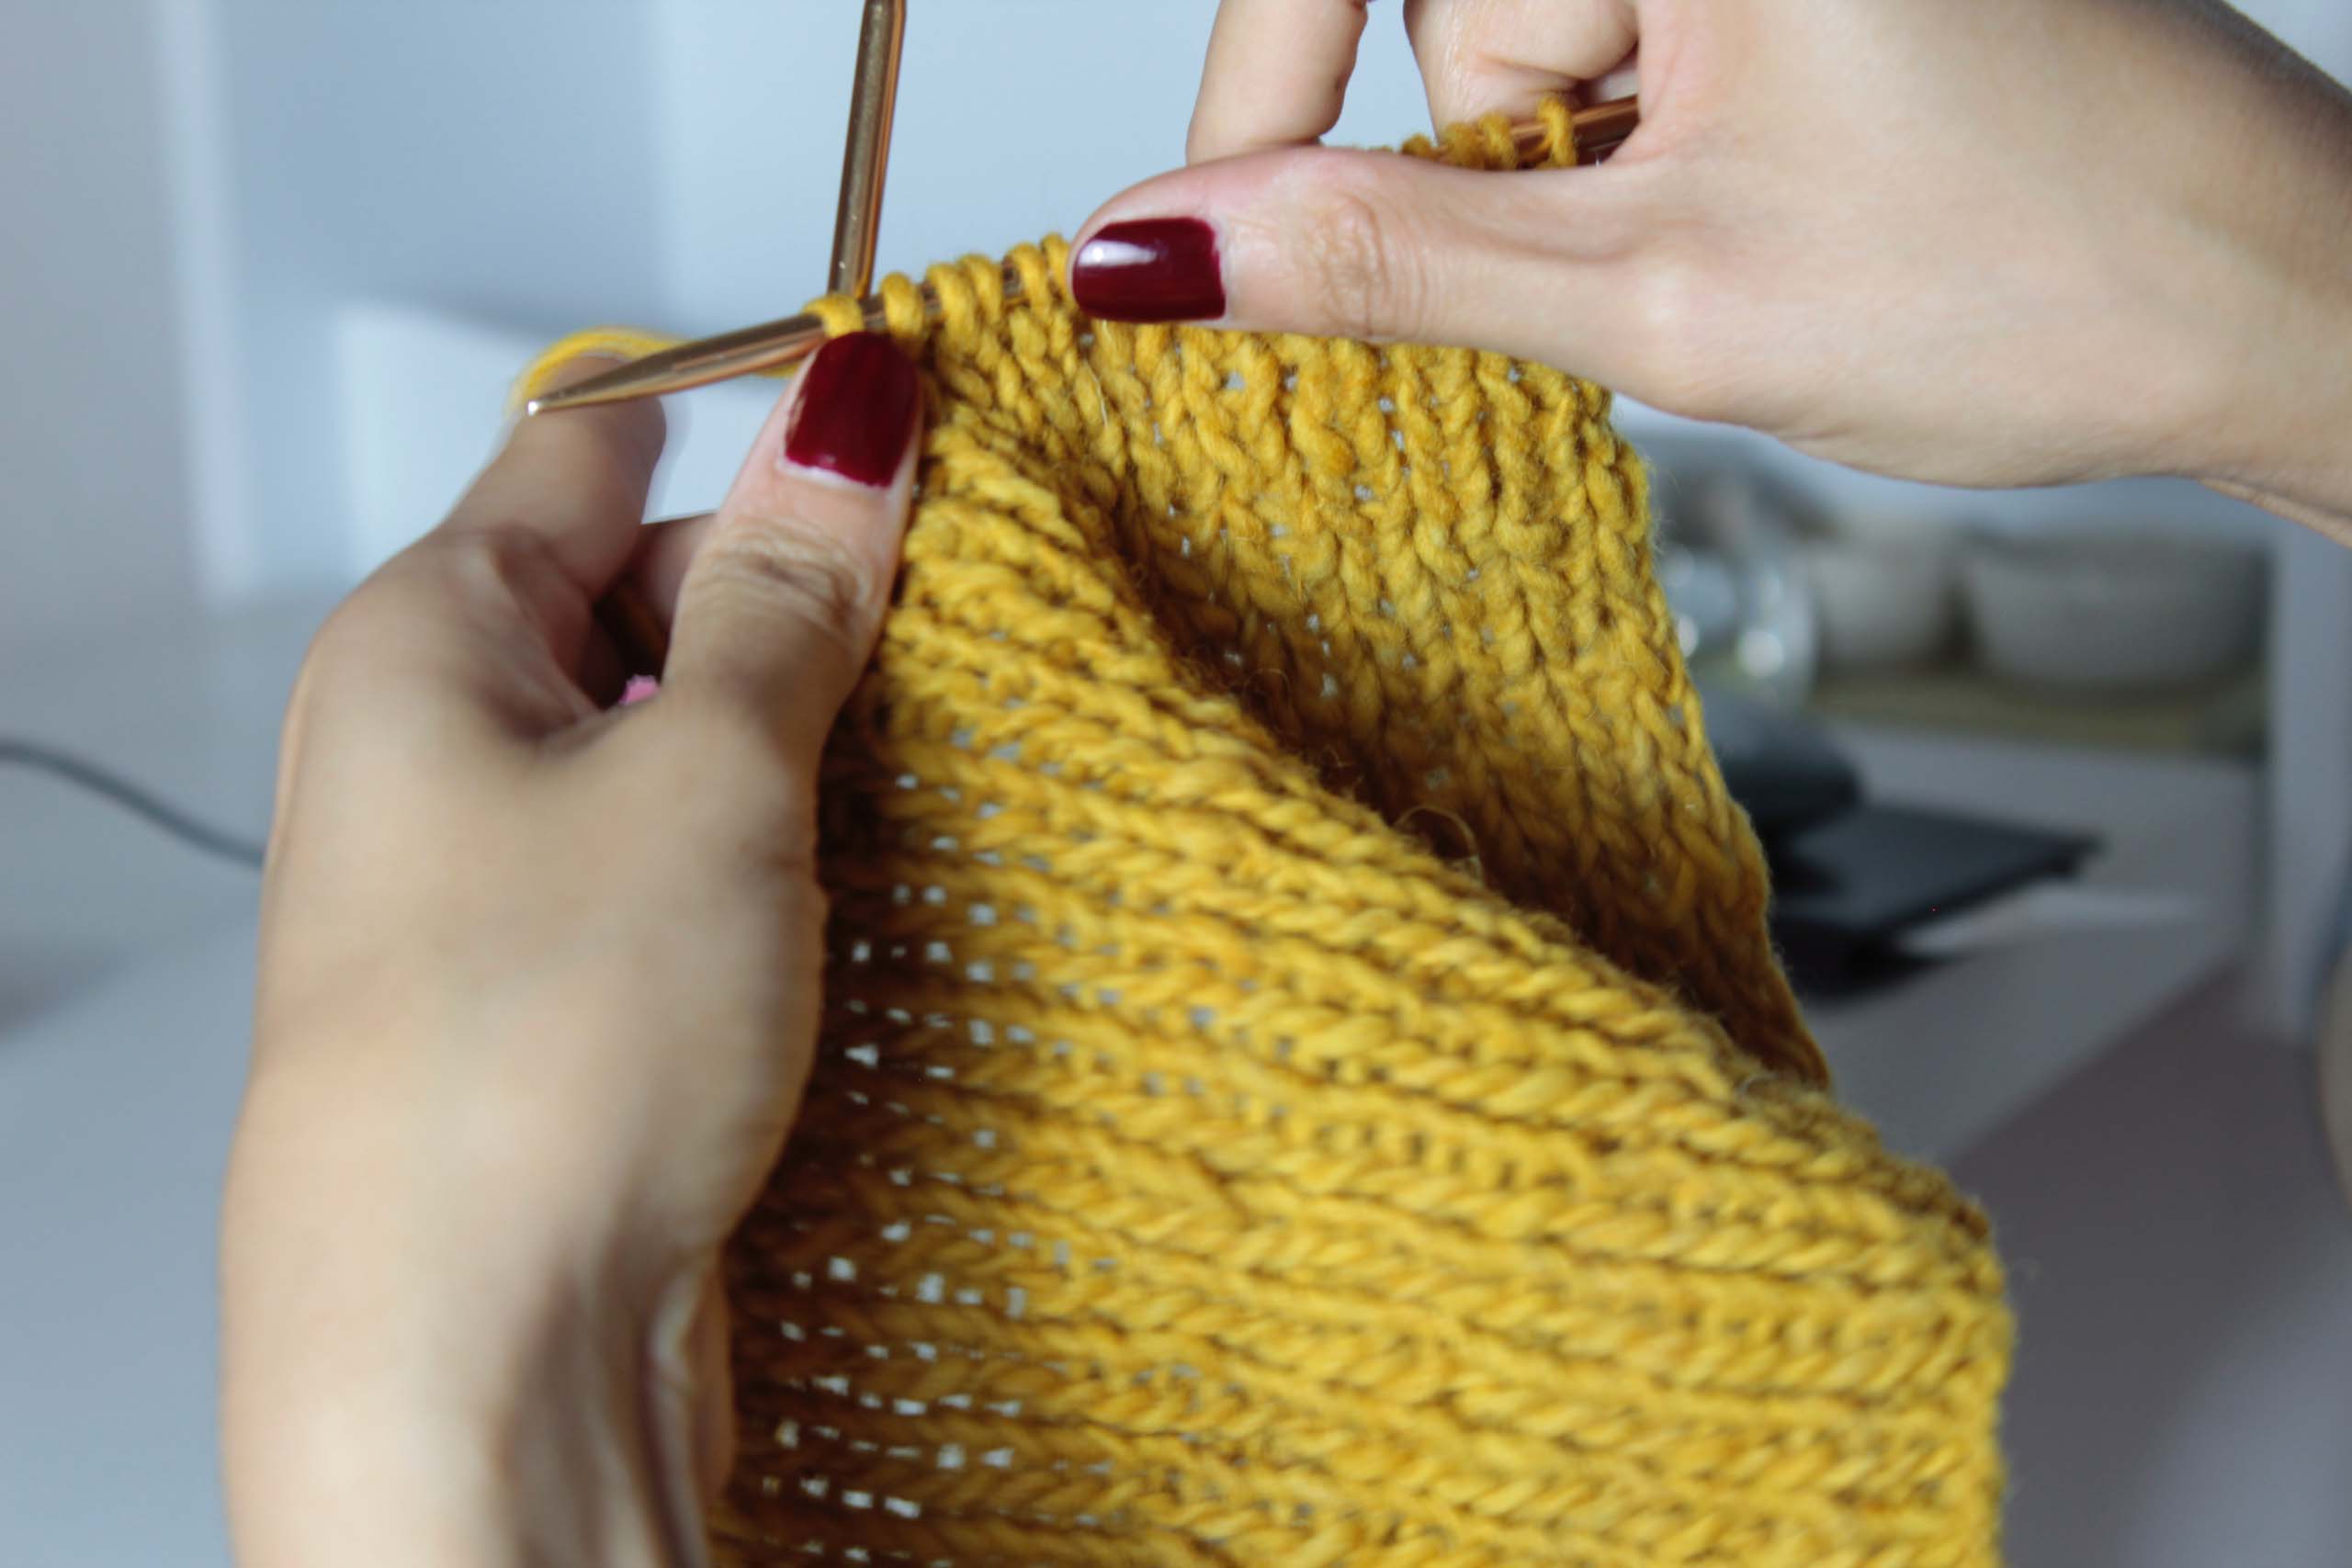 Meet with other knitters and crafters at this regular knitting group in Sylvania Library.